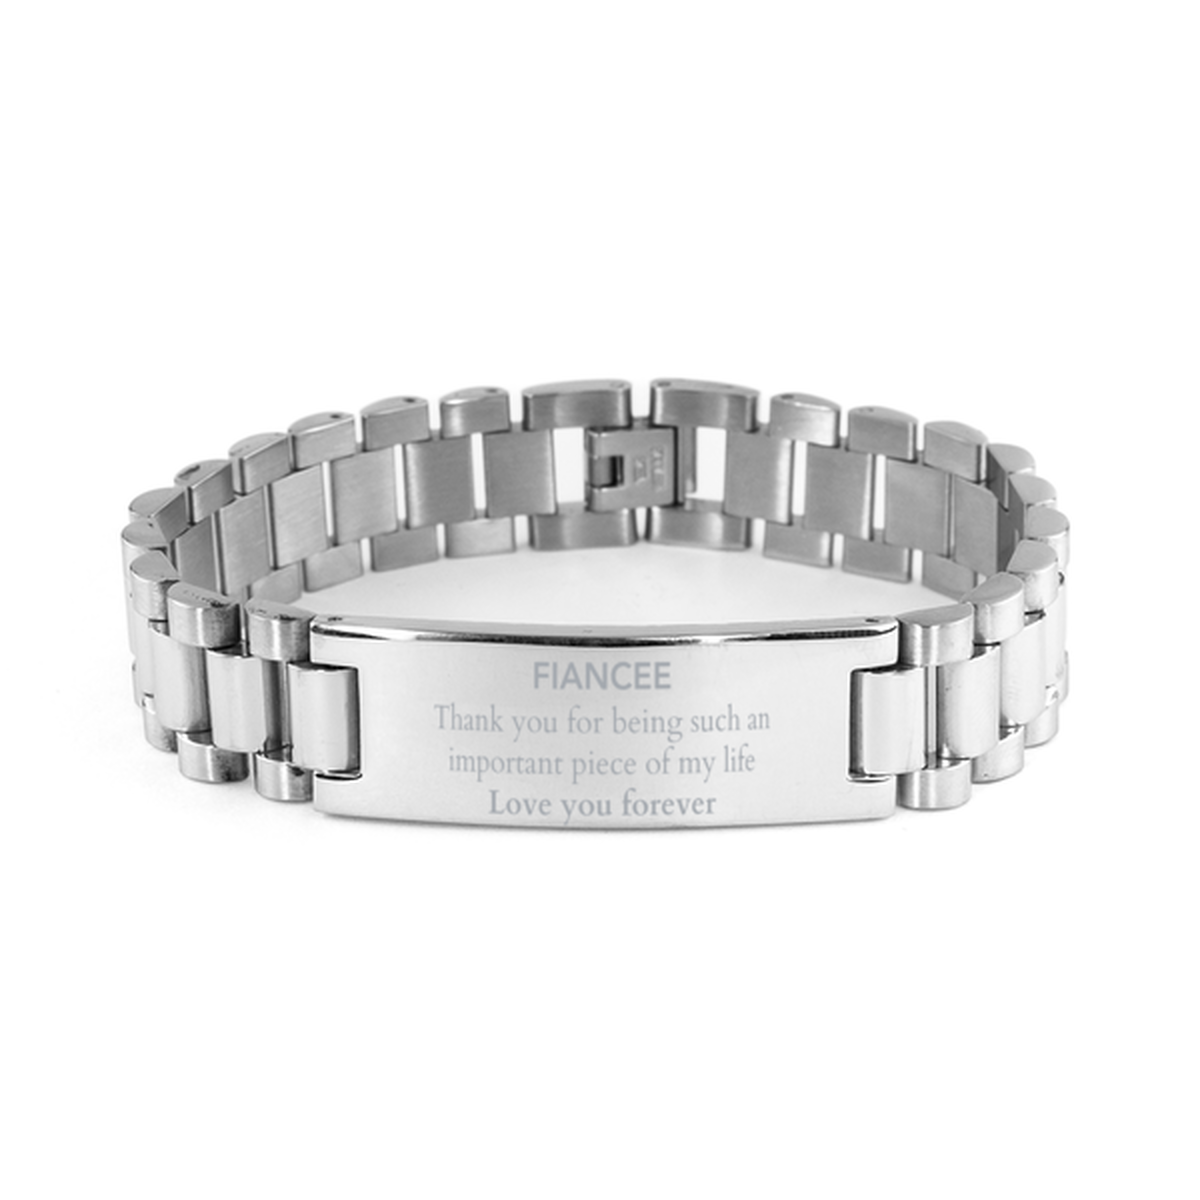 Appropriate Fiancee Ladder Stainless Steel Bracelet Epic Birthday Gifts for Fiancee Thank you for being such an important piece of my life Fiancee Christmas Mothers Fathers Day